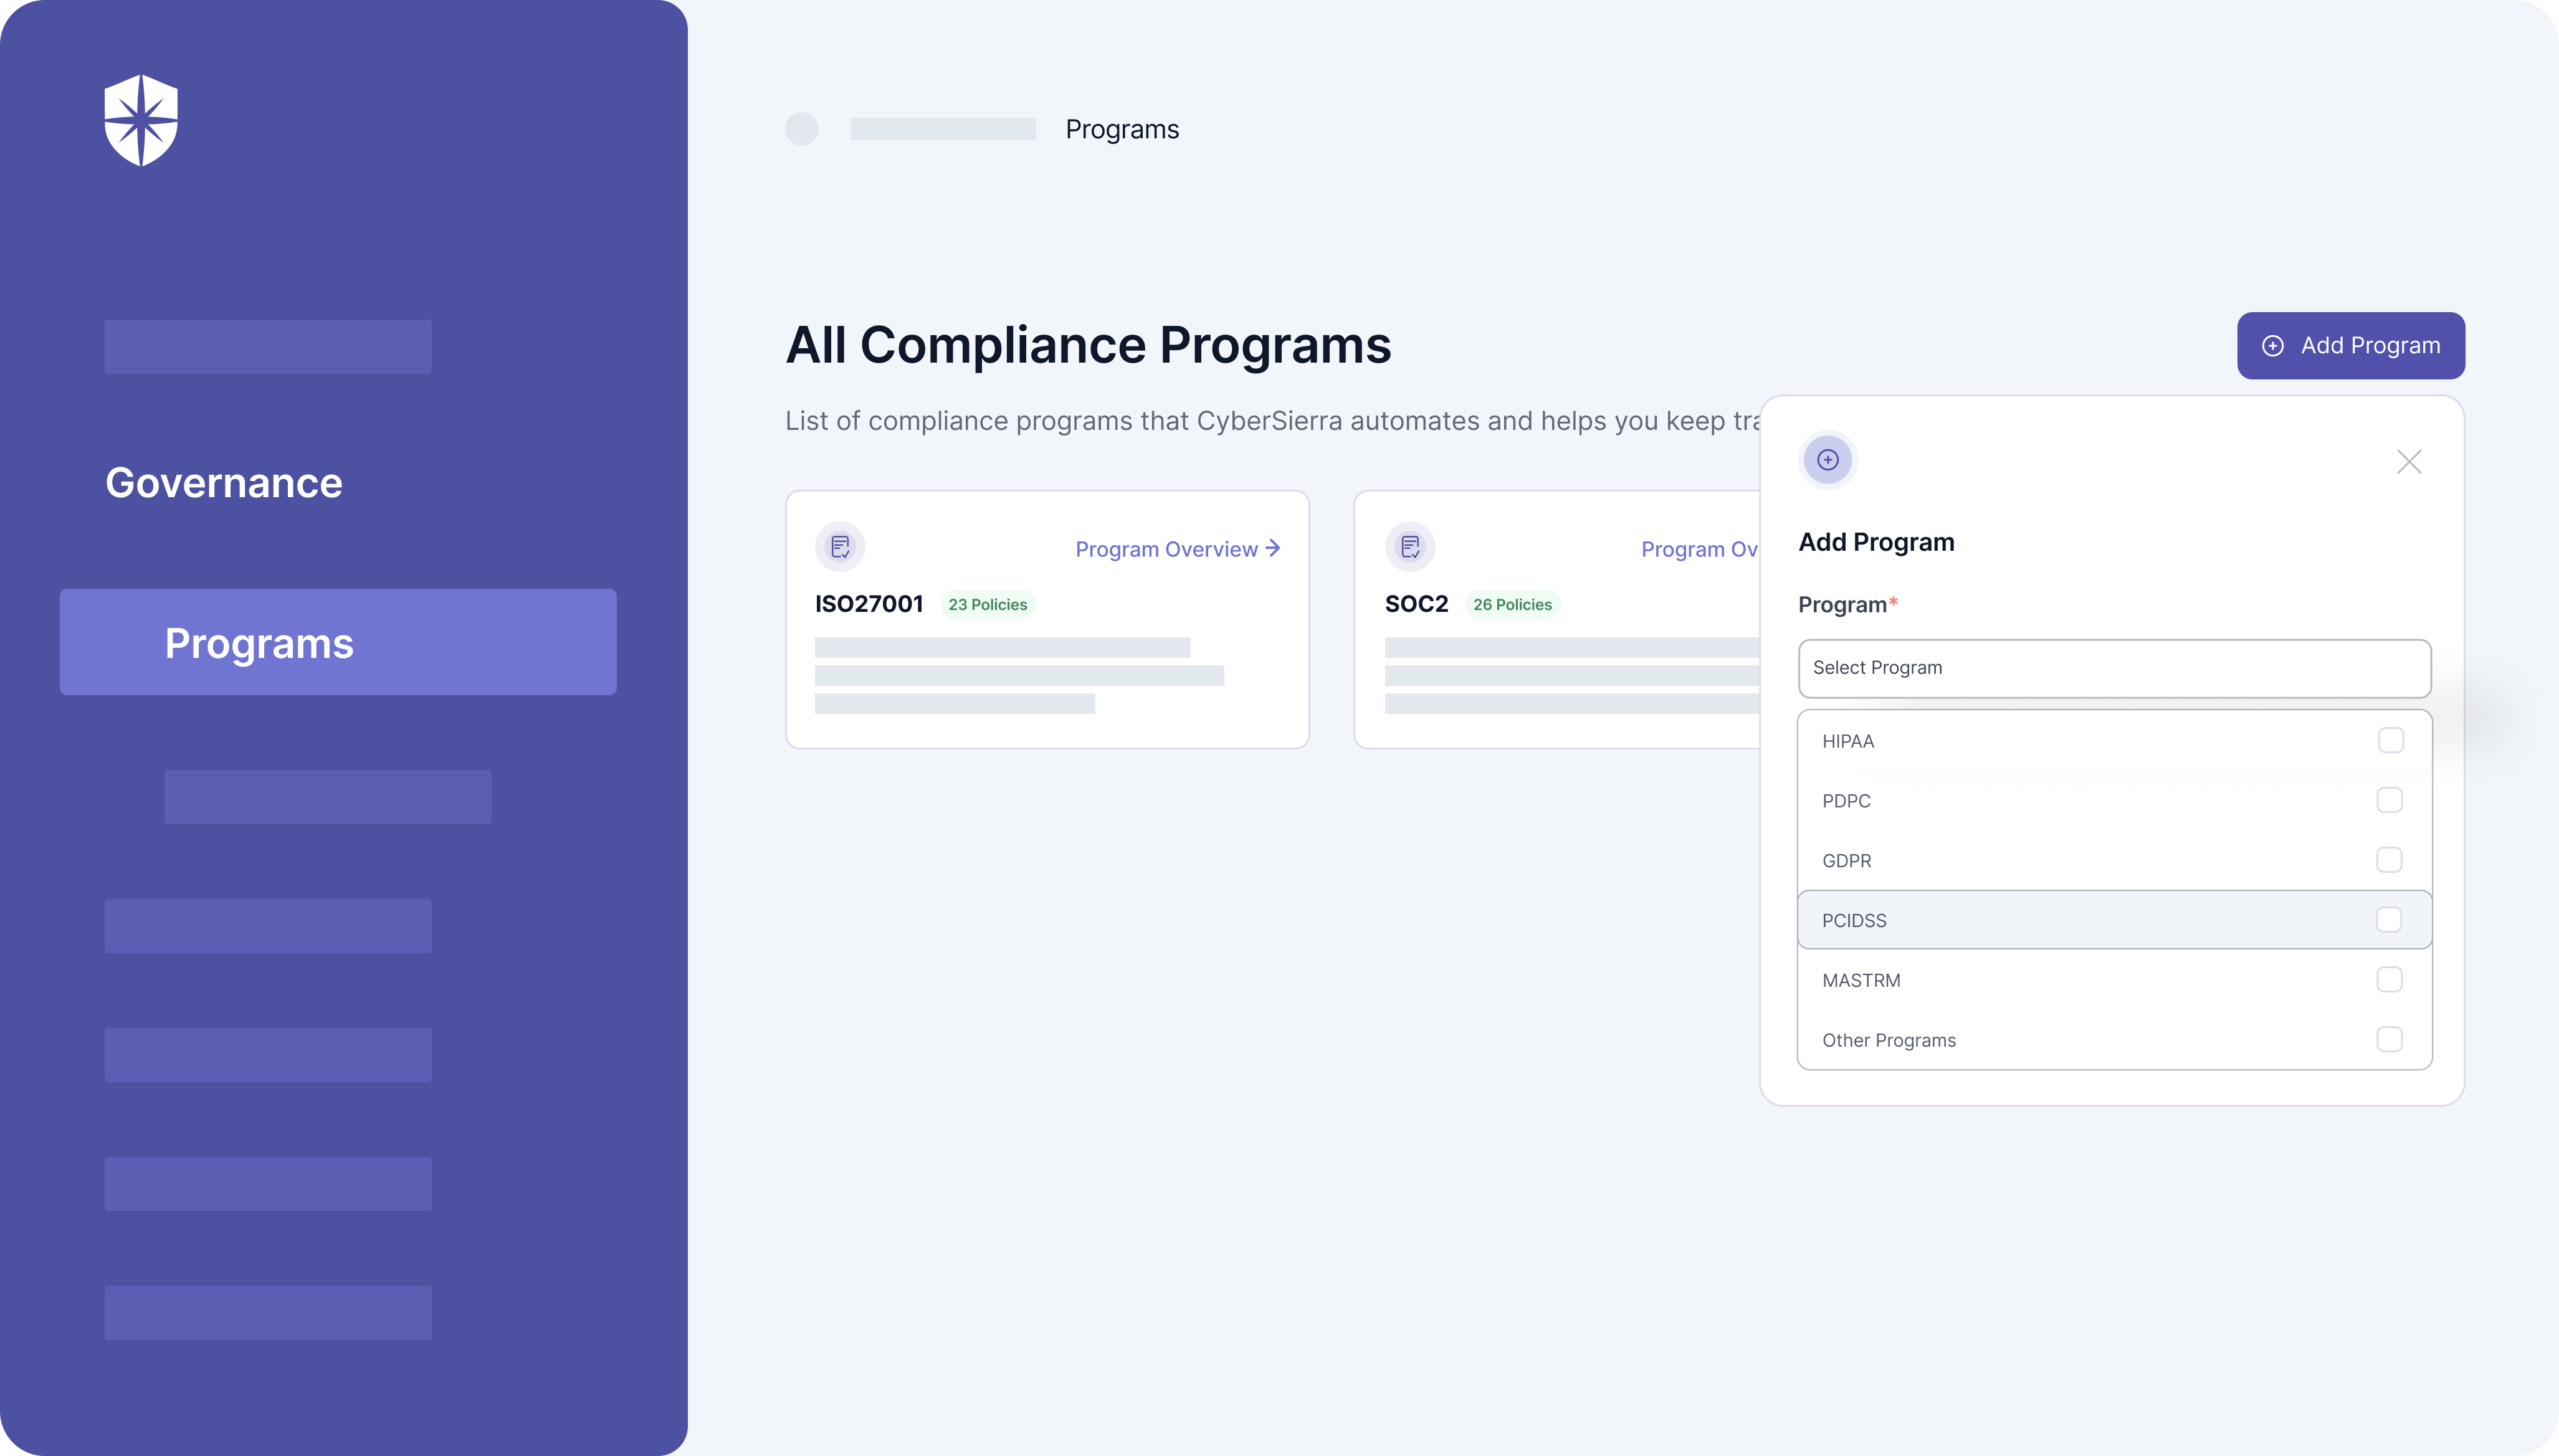 your company’s cyber posture data gets ingested natively into our GRC solution, reducing the entire process of getting standard and custom compliance certifications to a few simple clicks